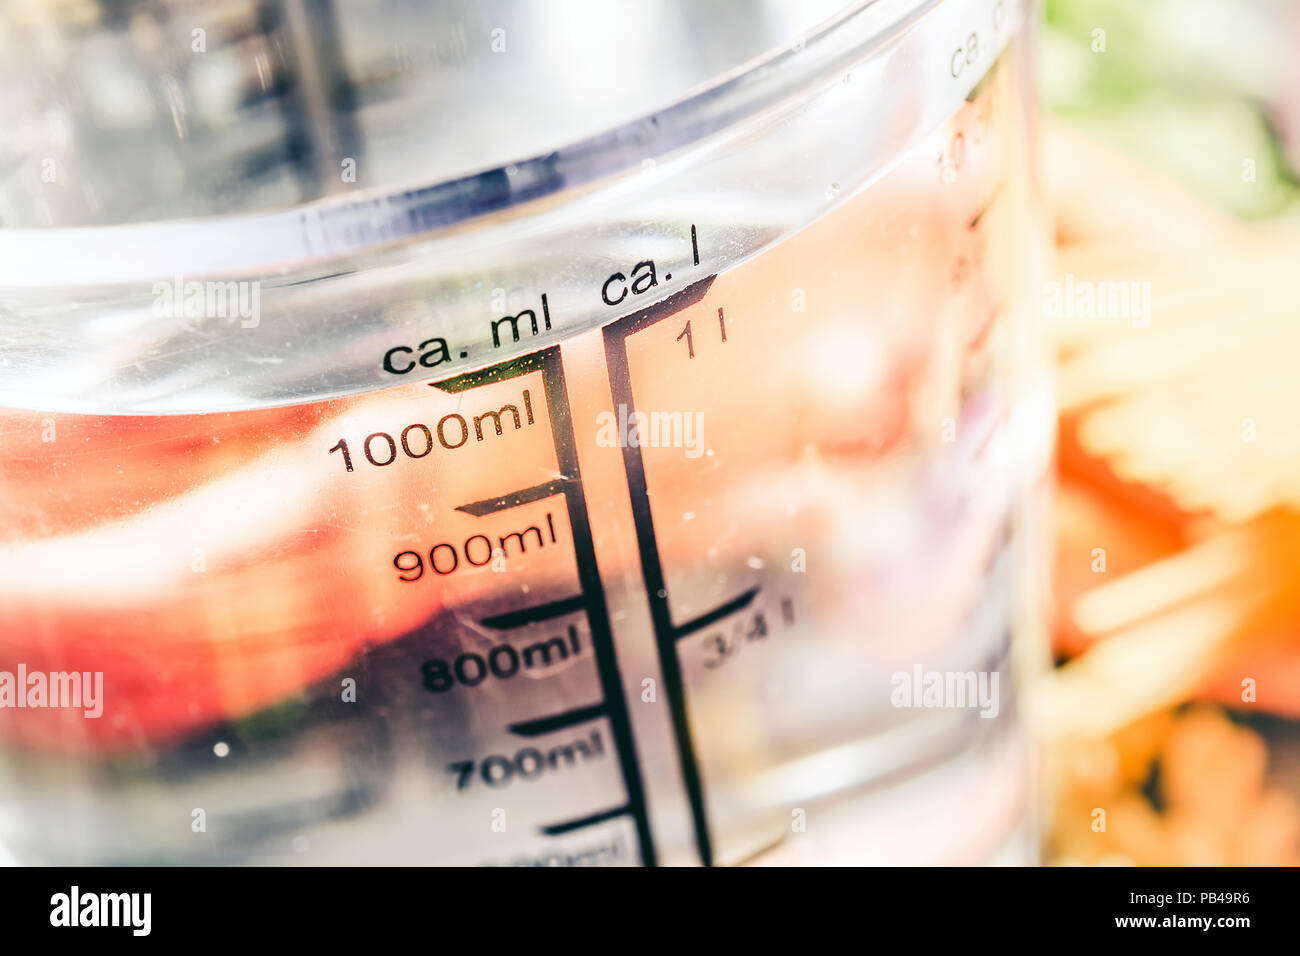 https://c8.alamy.com/comp/PB49R6/1000-ml-ccm-water-in-a-measuring-cup-surrounded-by-noodles-onion-carrots-and-spices-PB49R6.jpg